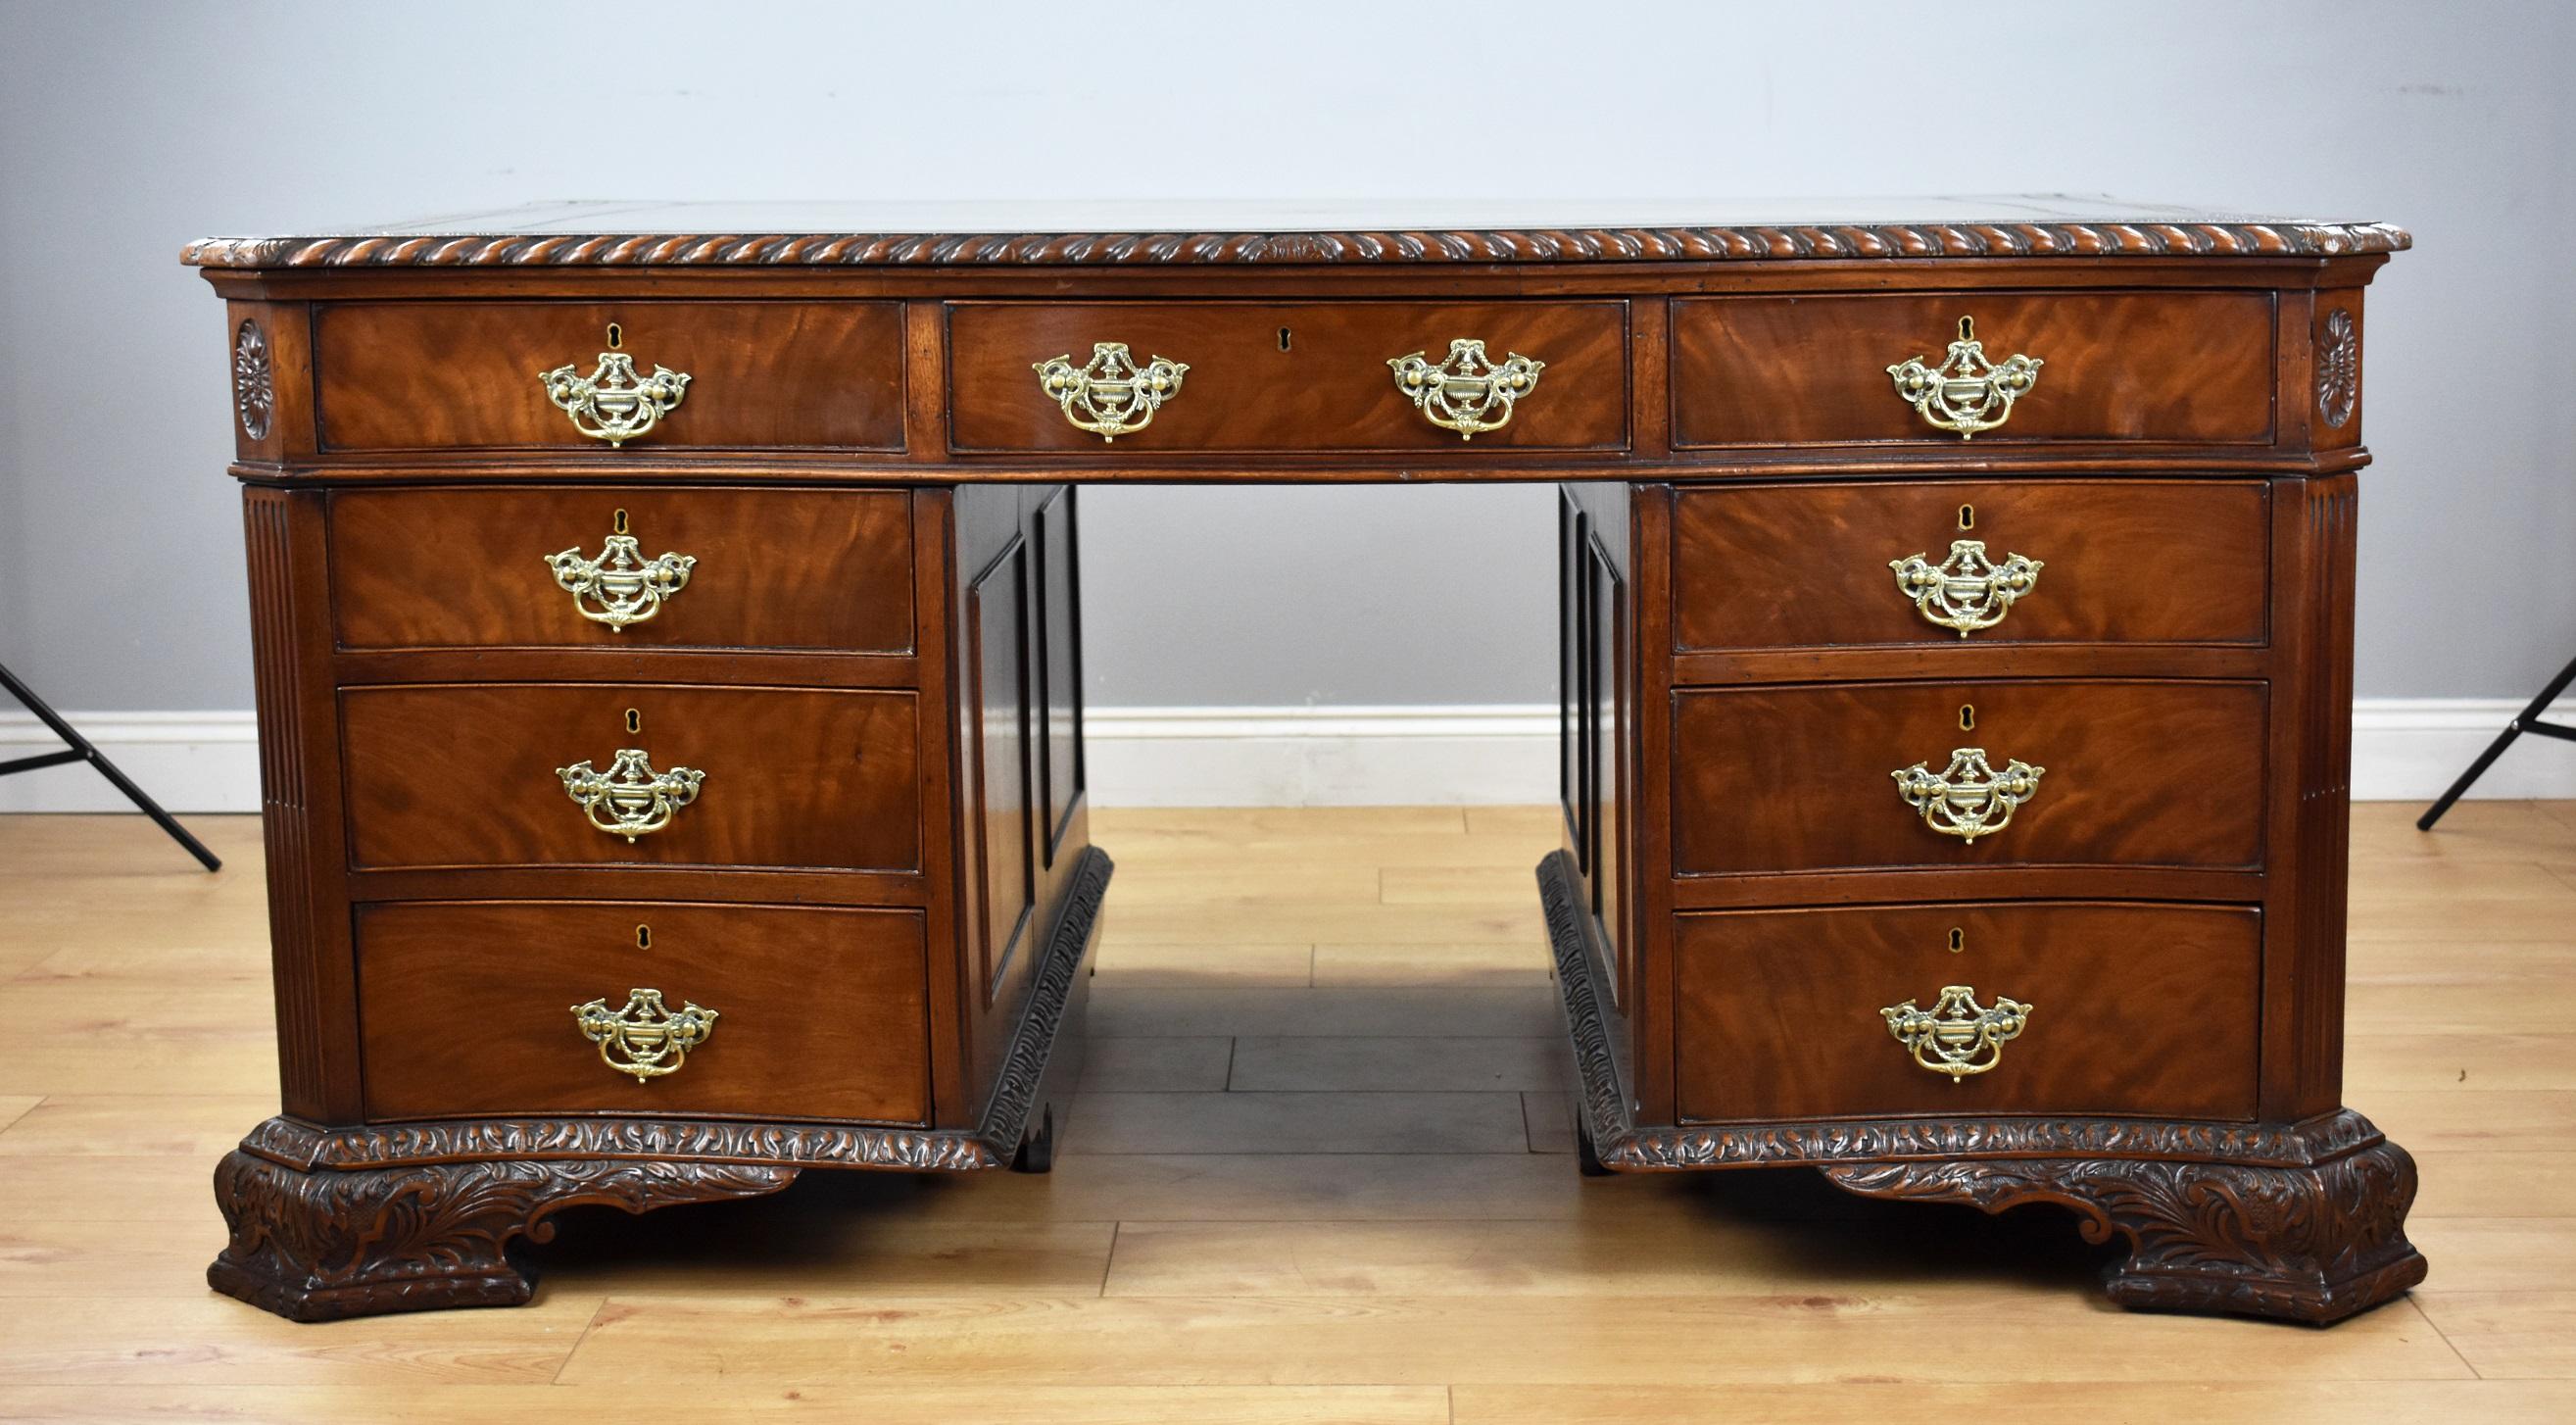 A fine quality antique mahogany Chippendale style serpentine partners desk by S&H Jewell. The top of the desk has a hand dyed green leather hide, decorated with a centre motif as well has fine gold and blind tooling. The top has gadrooned edge,